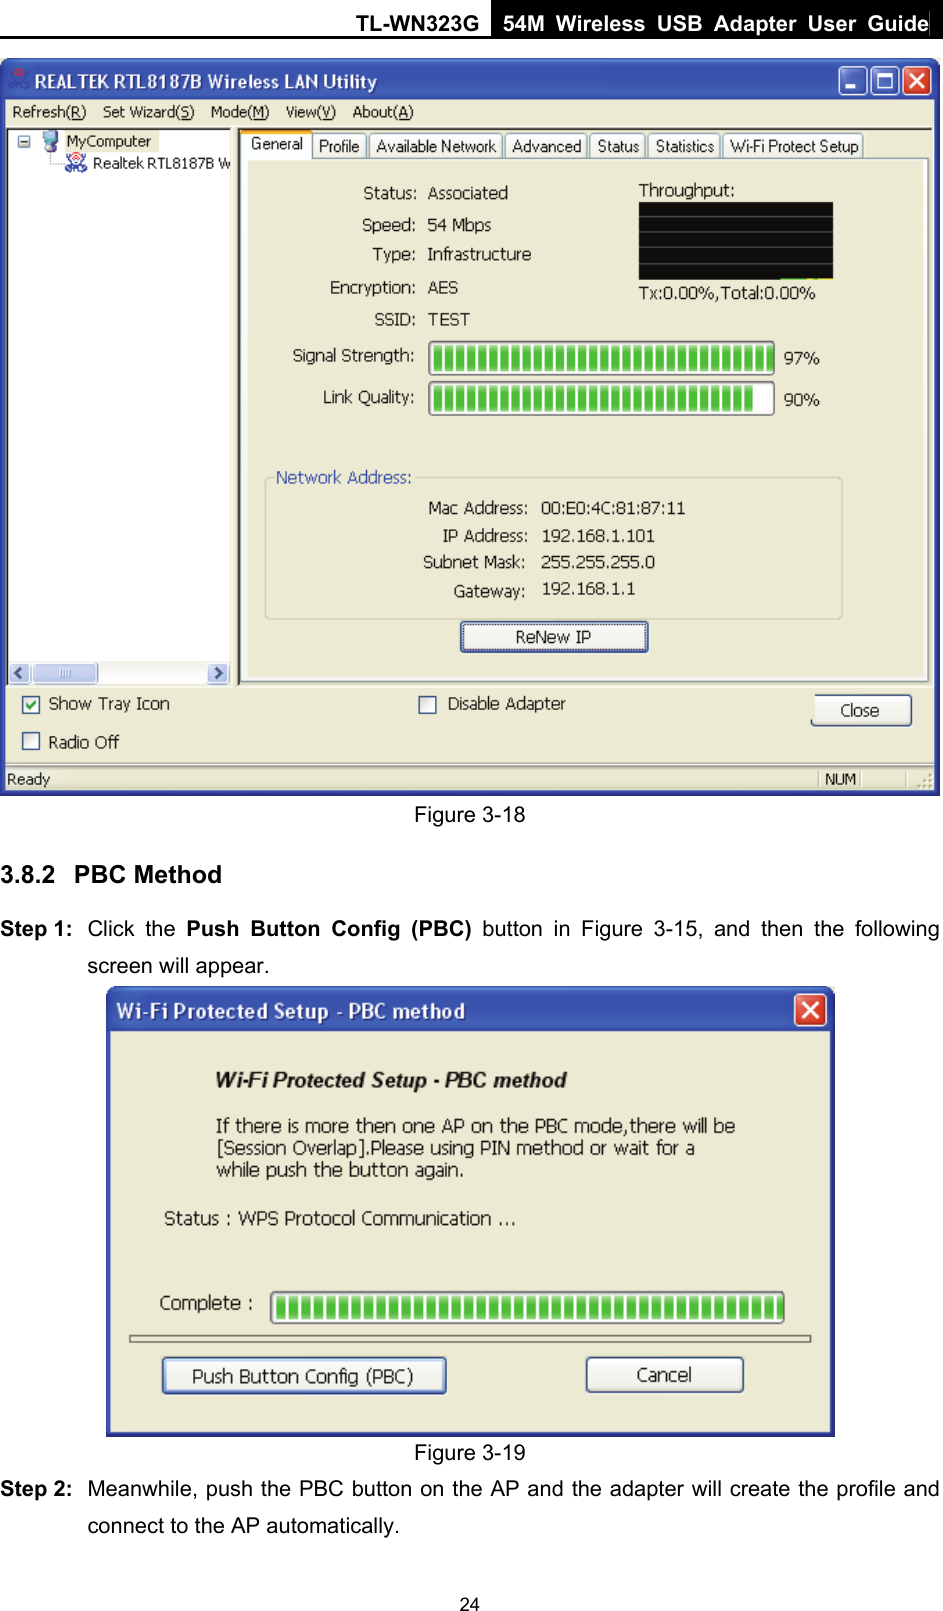 TL-WN323G 54M Wireless USB Adapter User Guide   24 Figure 3-18 3.8.2  PBC Method Step 1:  Click the Push Button Config (PBC) button in Figure 3-15, and then the following screen will appear.    Figure 3-19 Step 2:  Meanwhile, push the PBC button on the AP and the adapter will create the profile and connect to the AP automatically.   